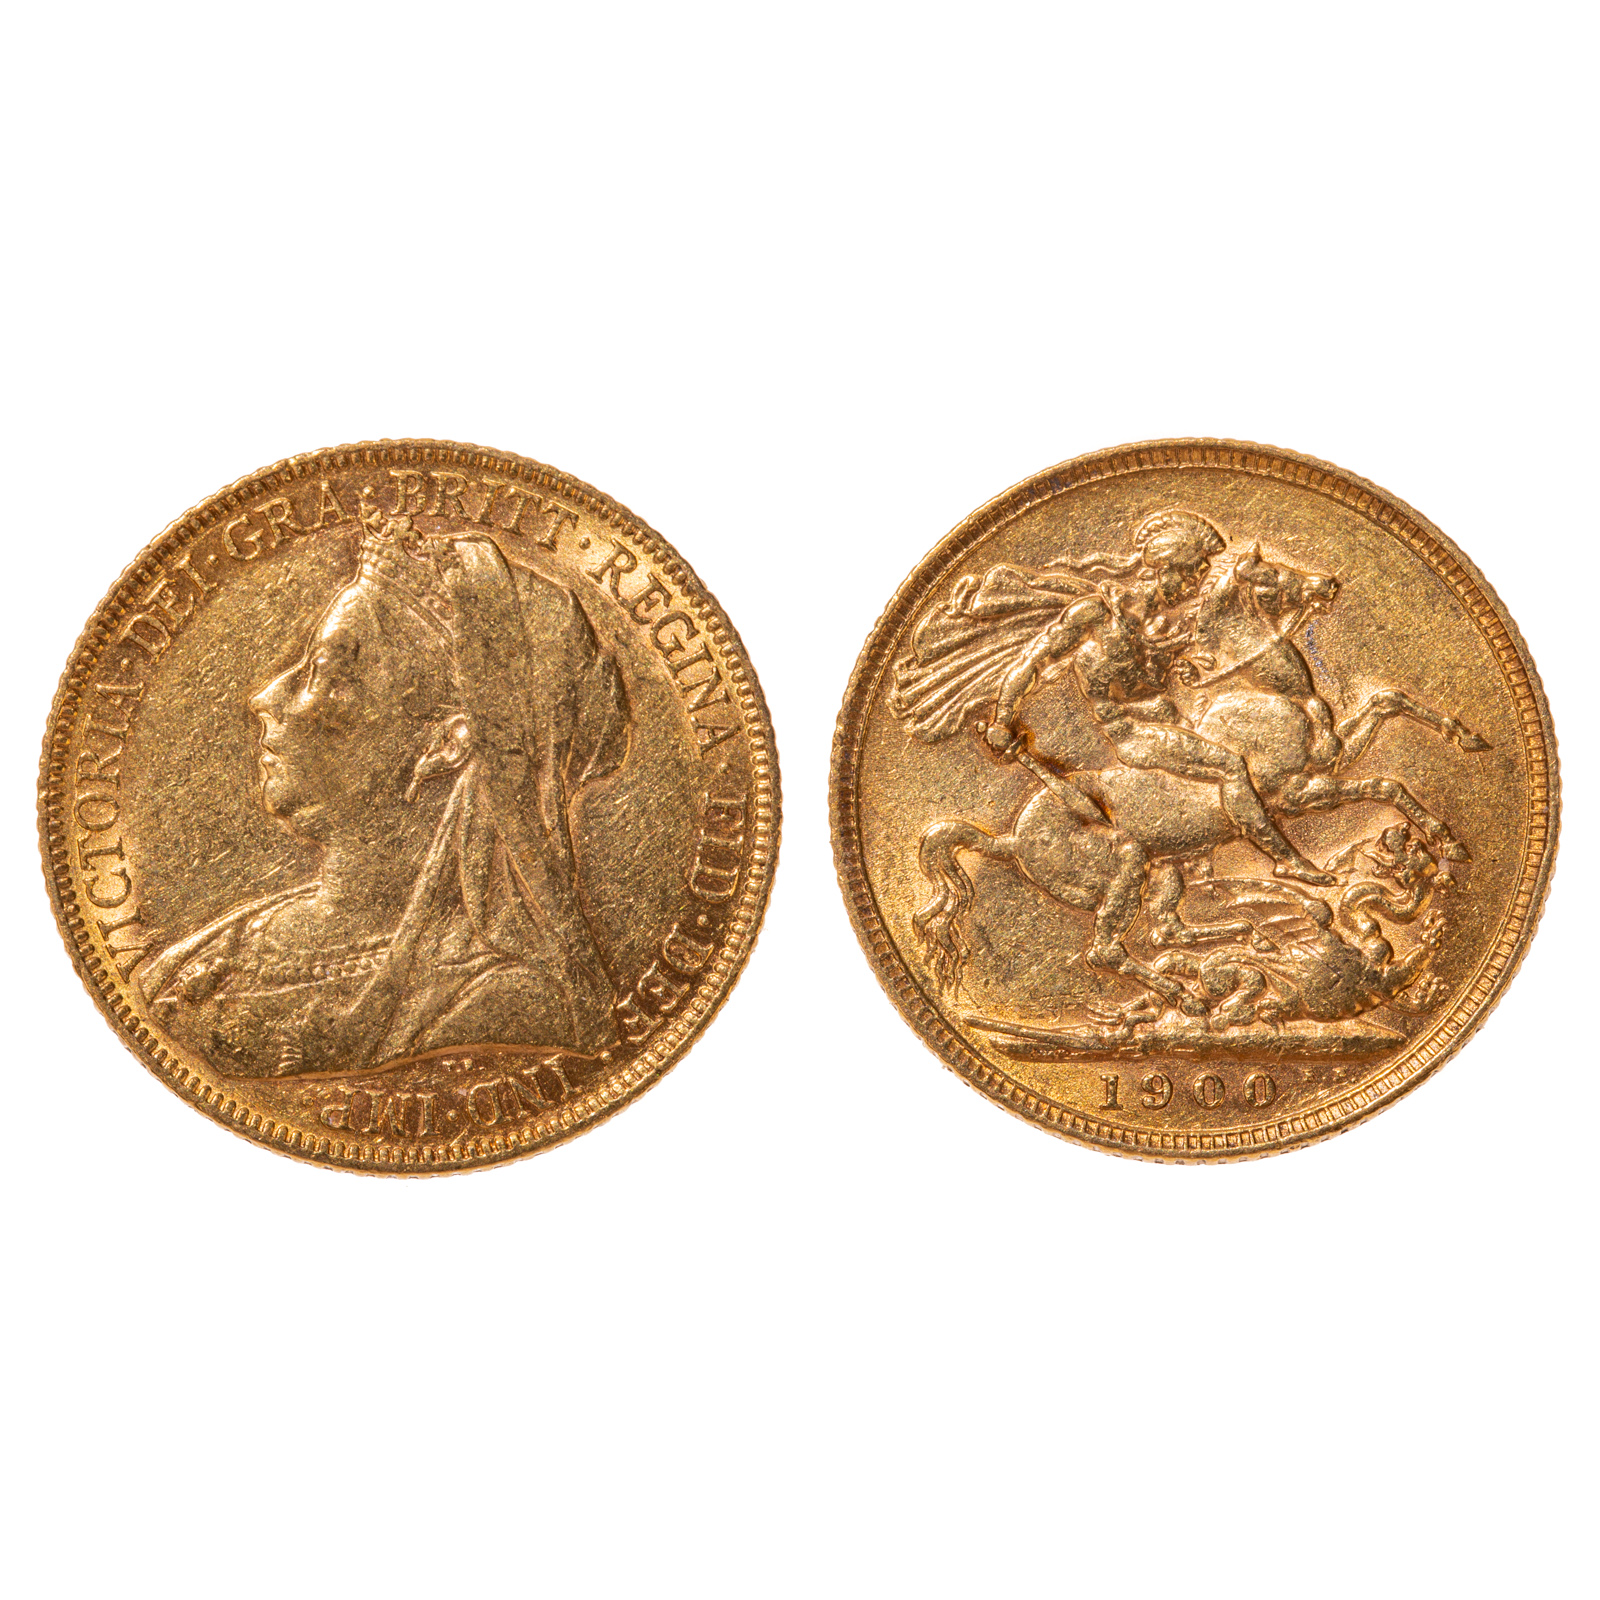 1900 GOLD SOVEREIGN FROM LONDON